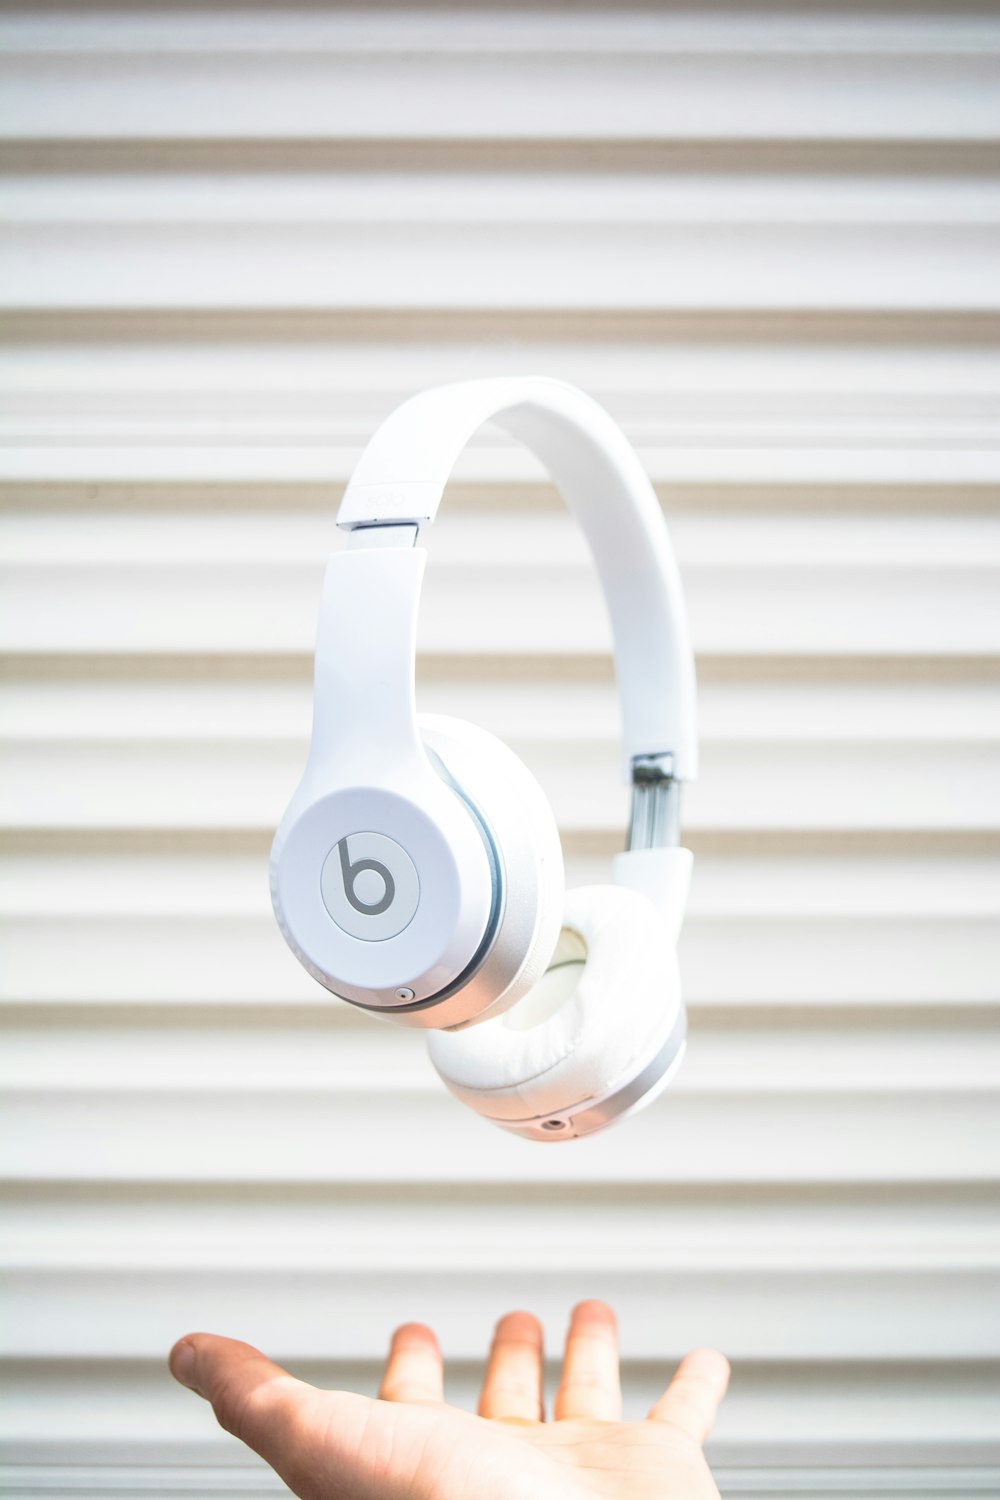 500+ Earphone Pictures [HQ] | Download Free Images on Unsplash